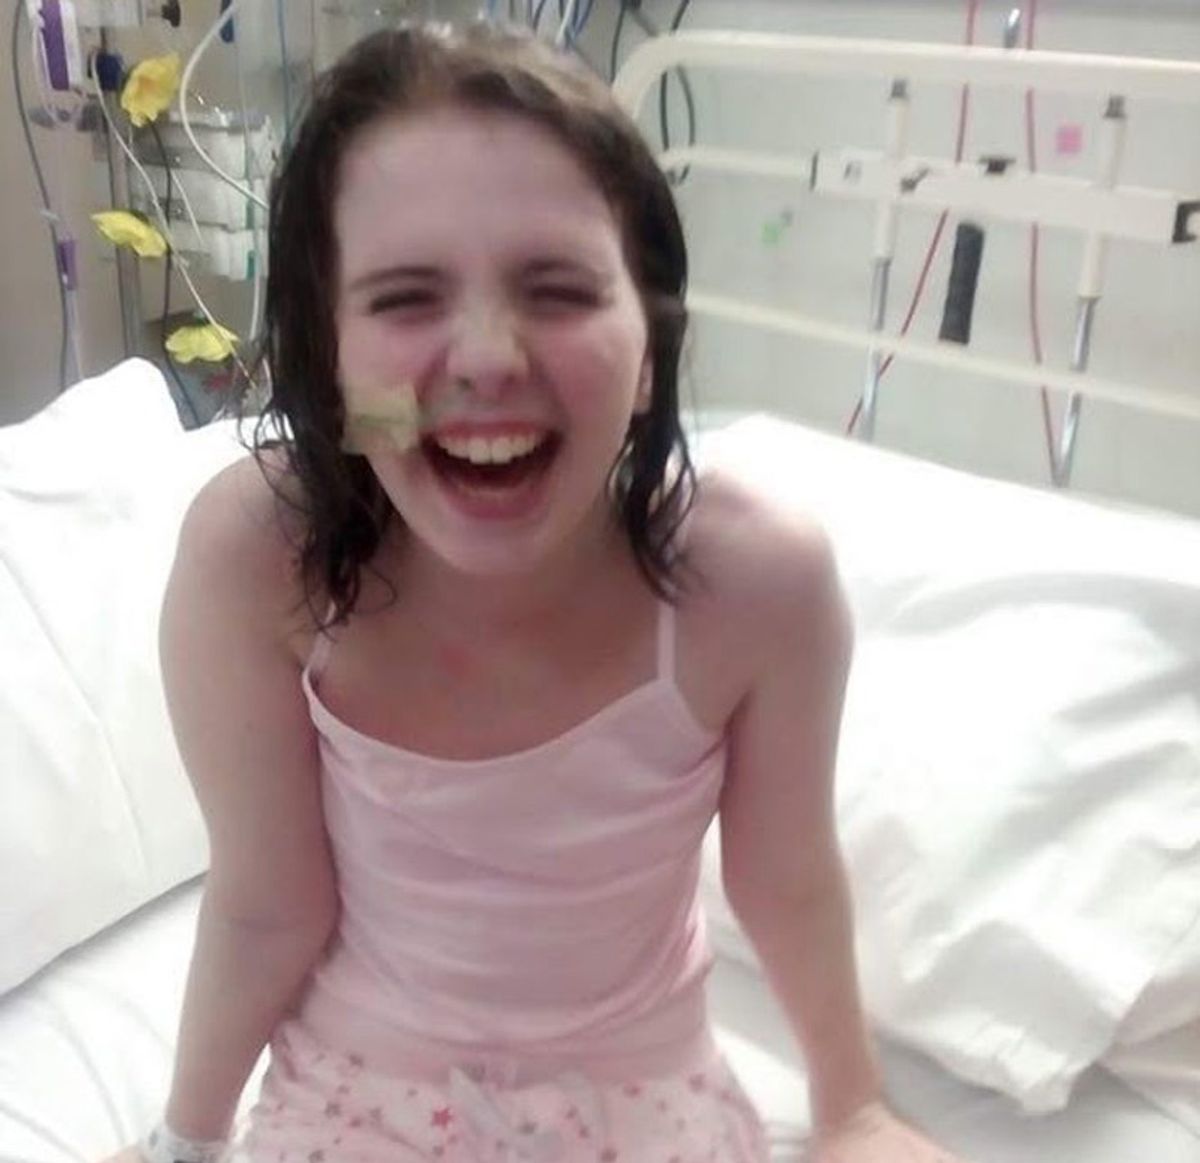 Rare Brain Condition Turns Happy Young Girl Into A Foul-Mouthed Teen Who Doesn't Recognize Her Own Family